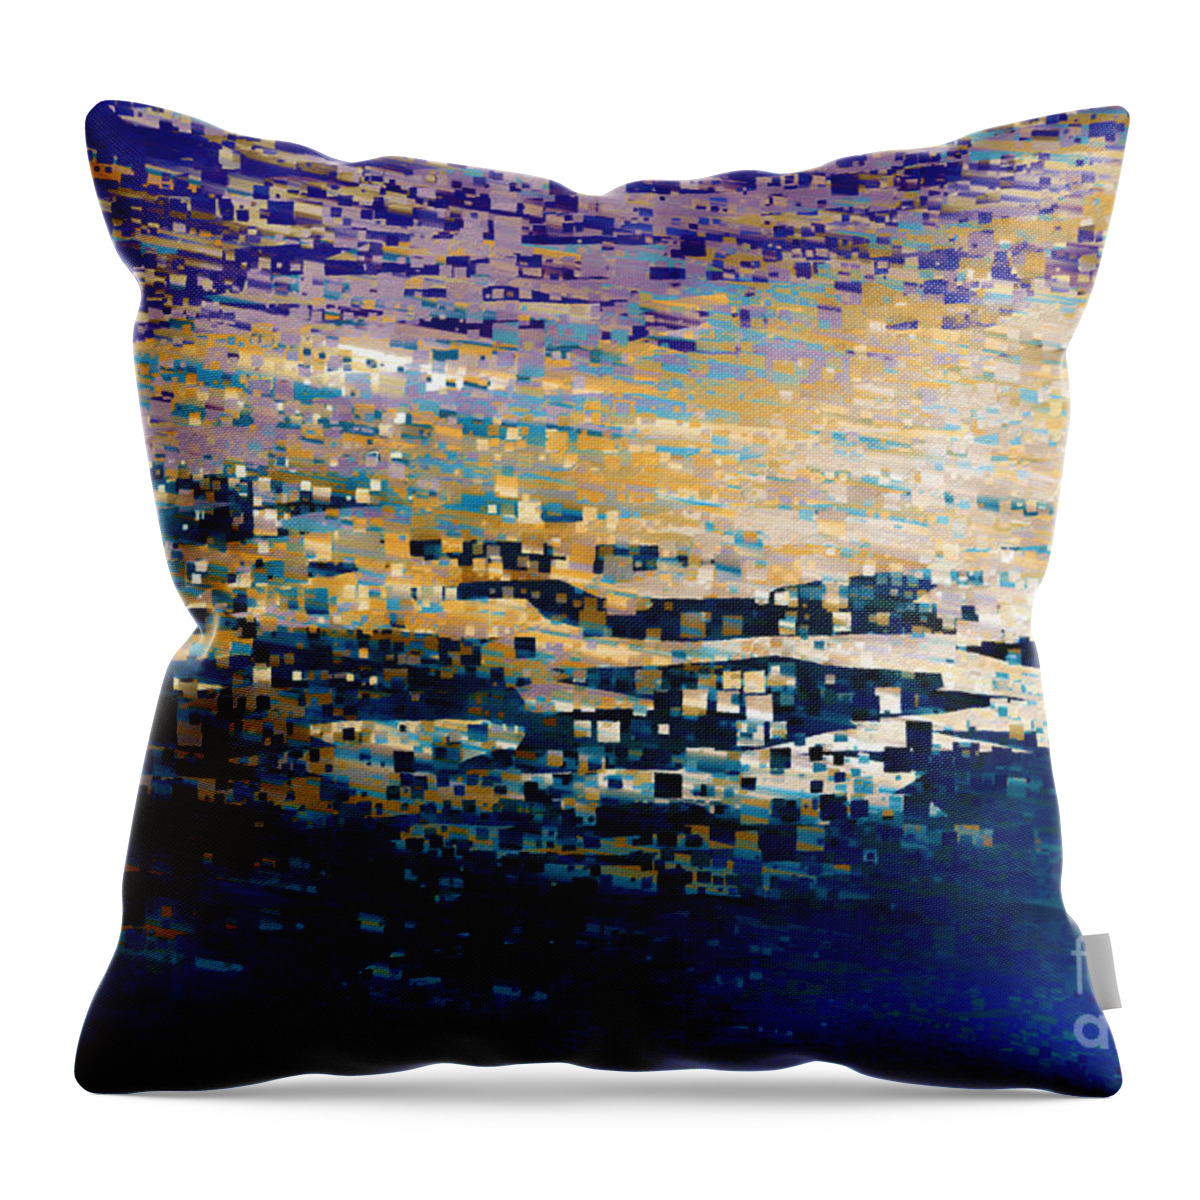 Purple Throw Pillow featuring the painting John 16 33 The Peace Of God. by Mark Lawrence